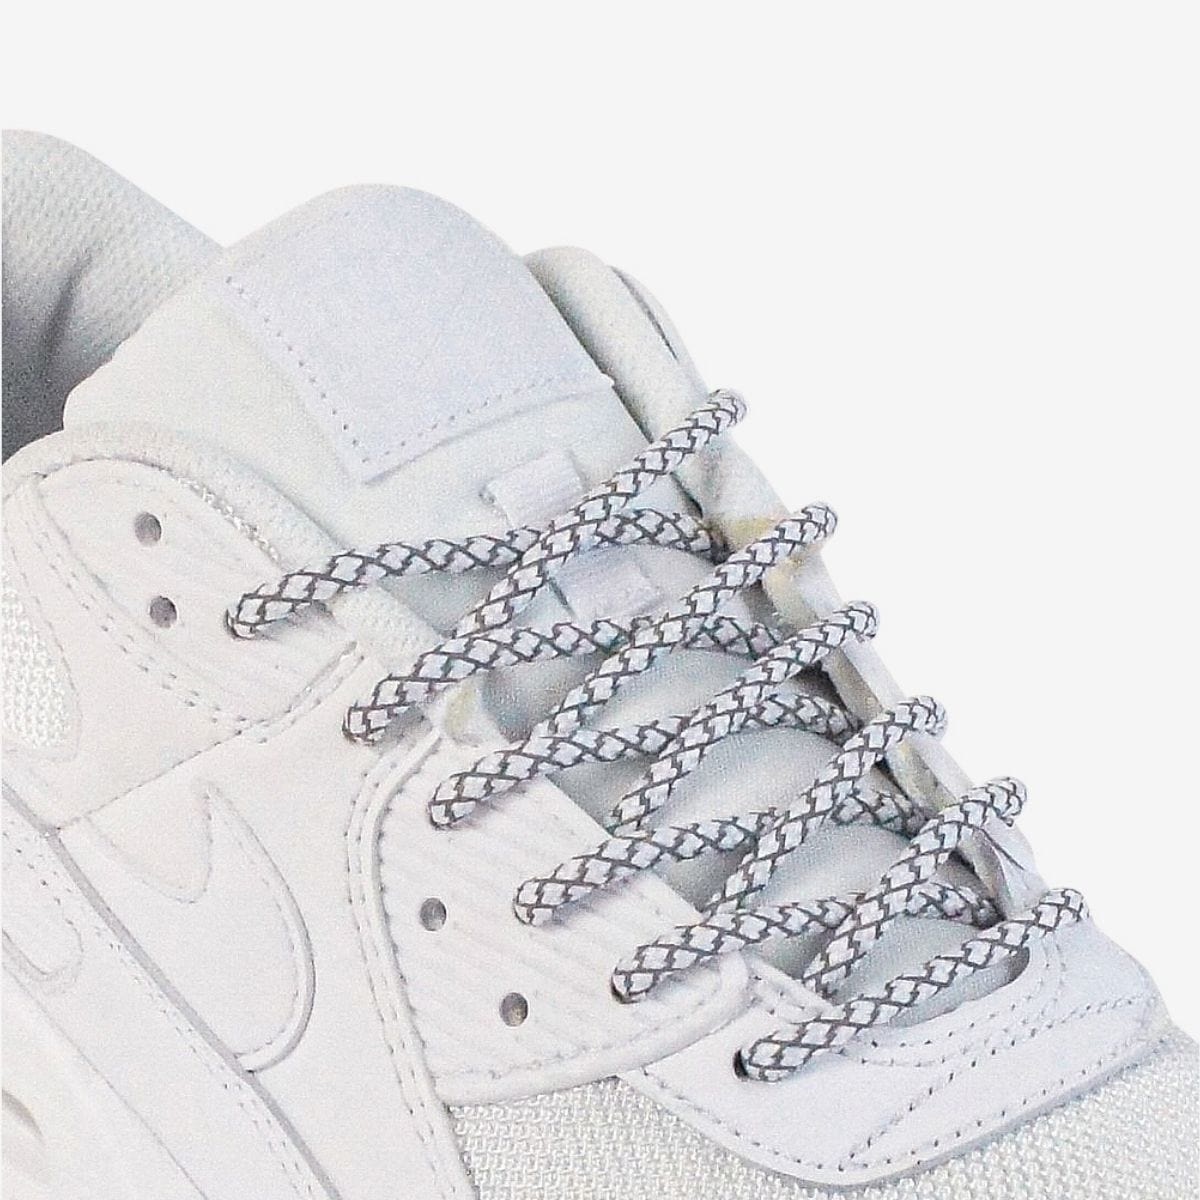 custom-color-shoelaces-on-white-sneakers-with-reflective-white-laces